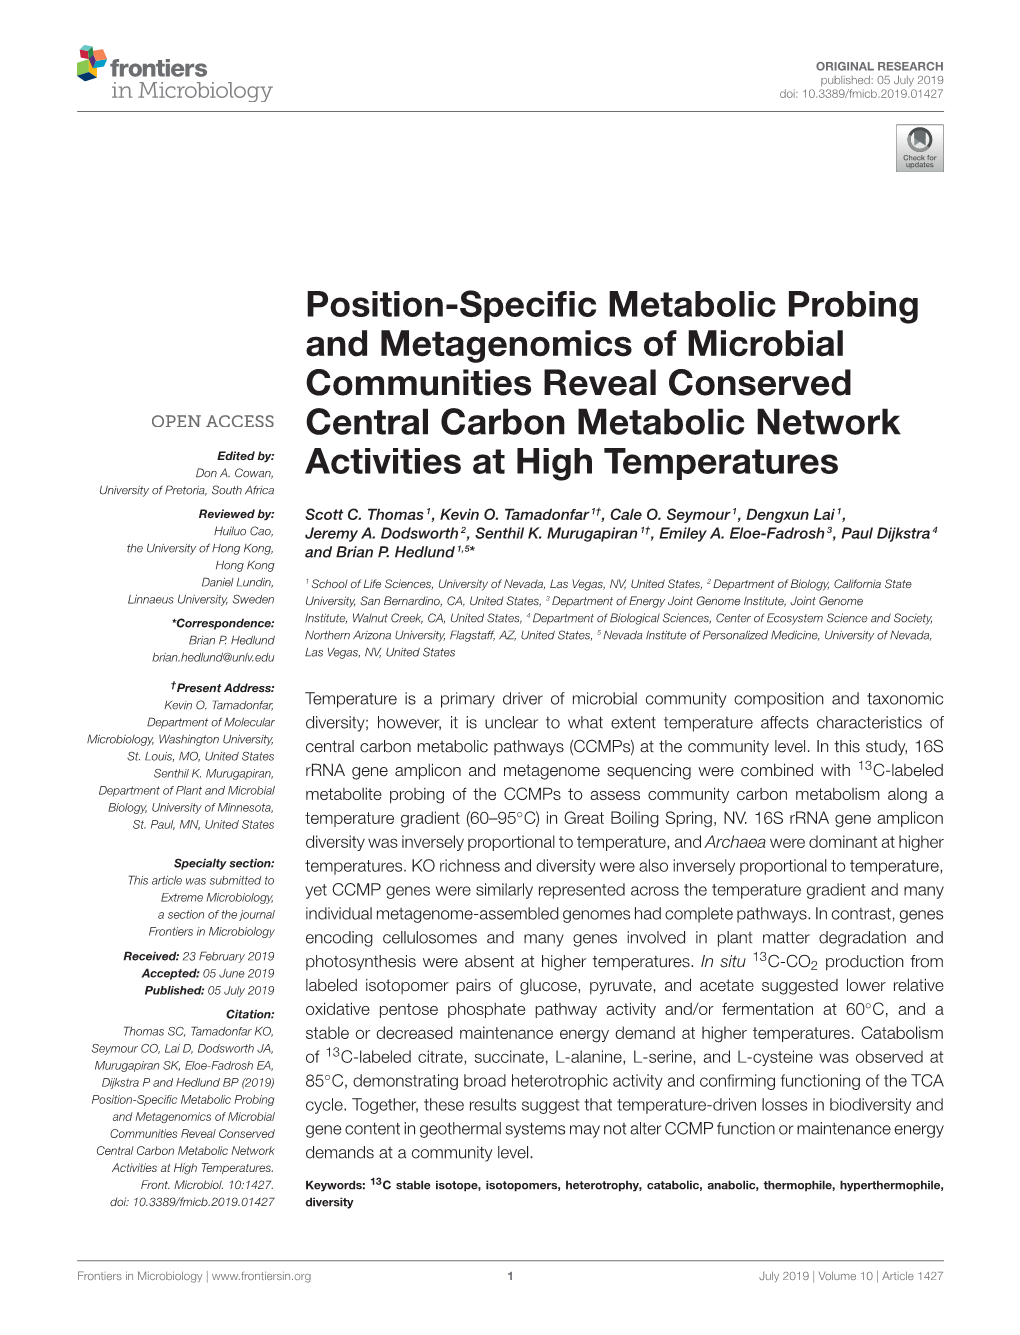 Position-Specific Metabolic Probing and Metagenomics of Microbial